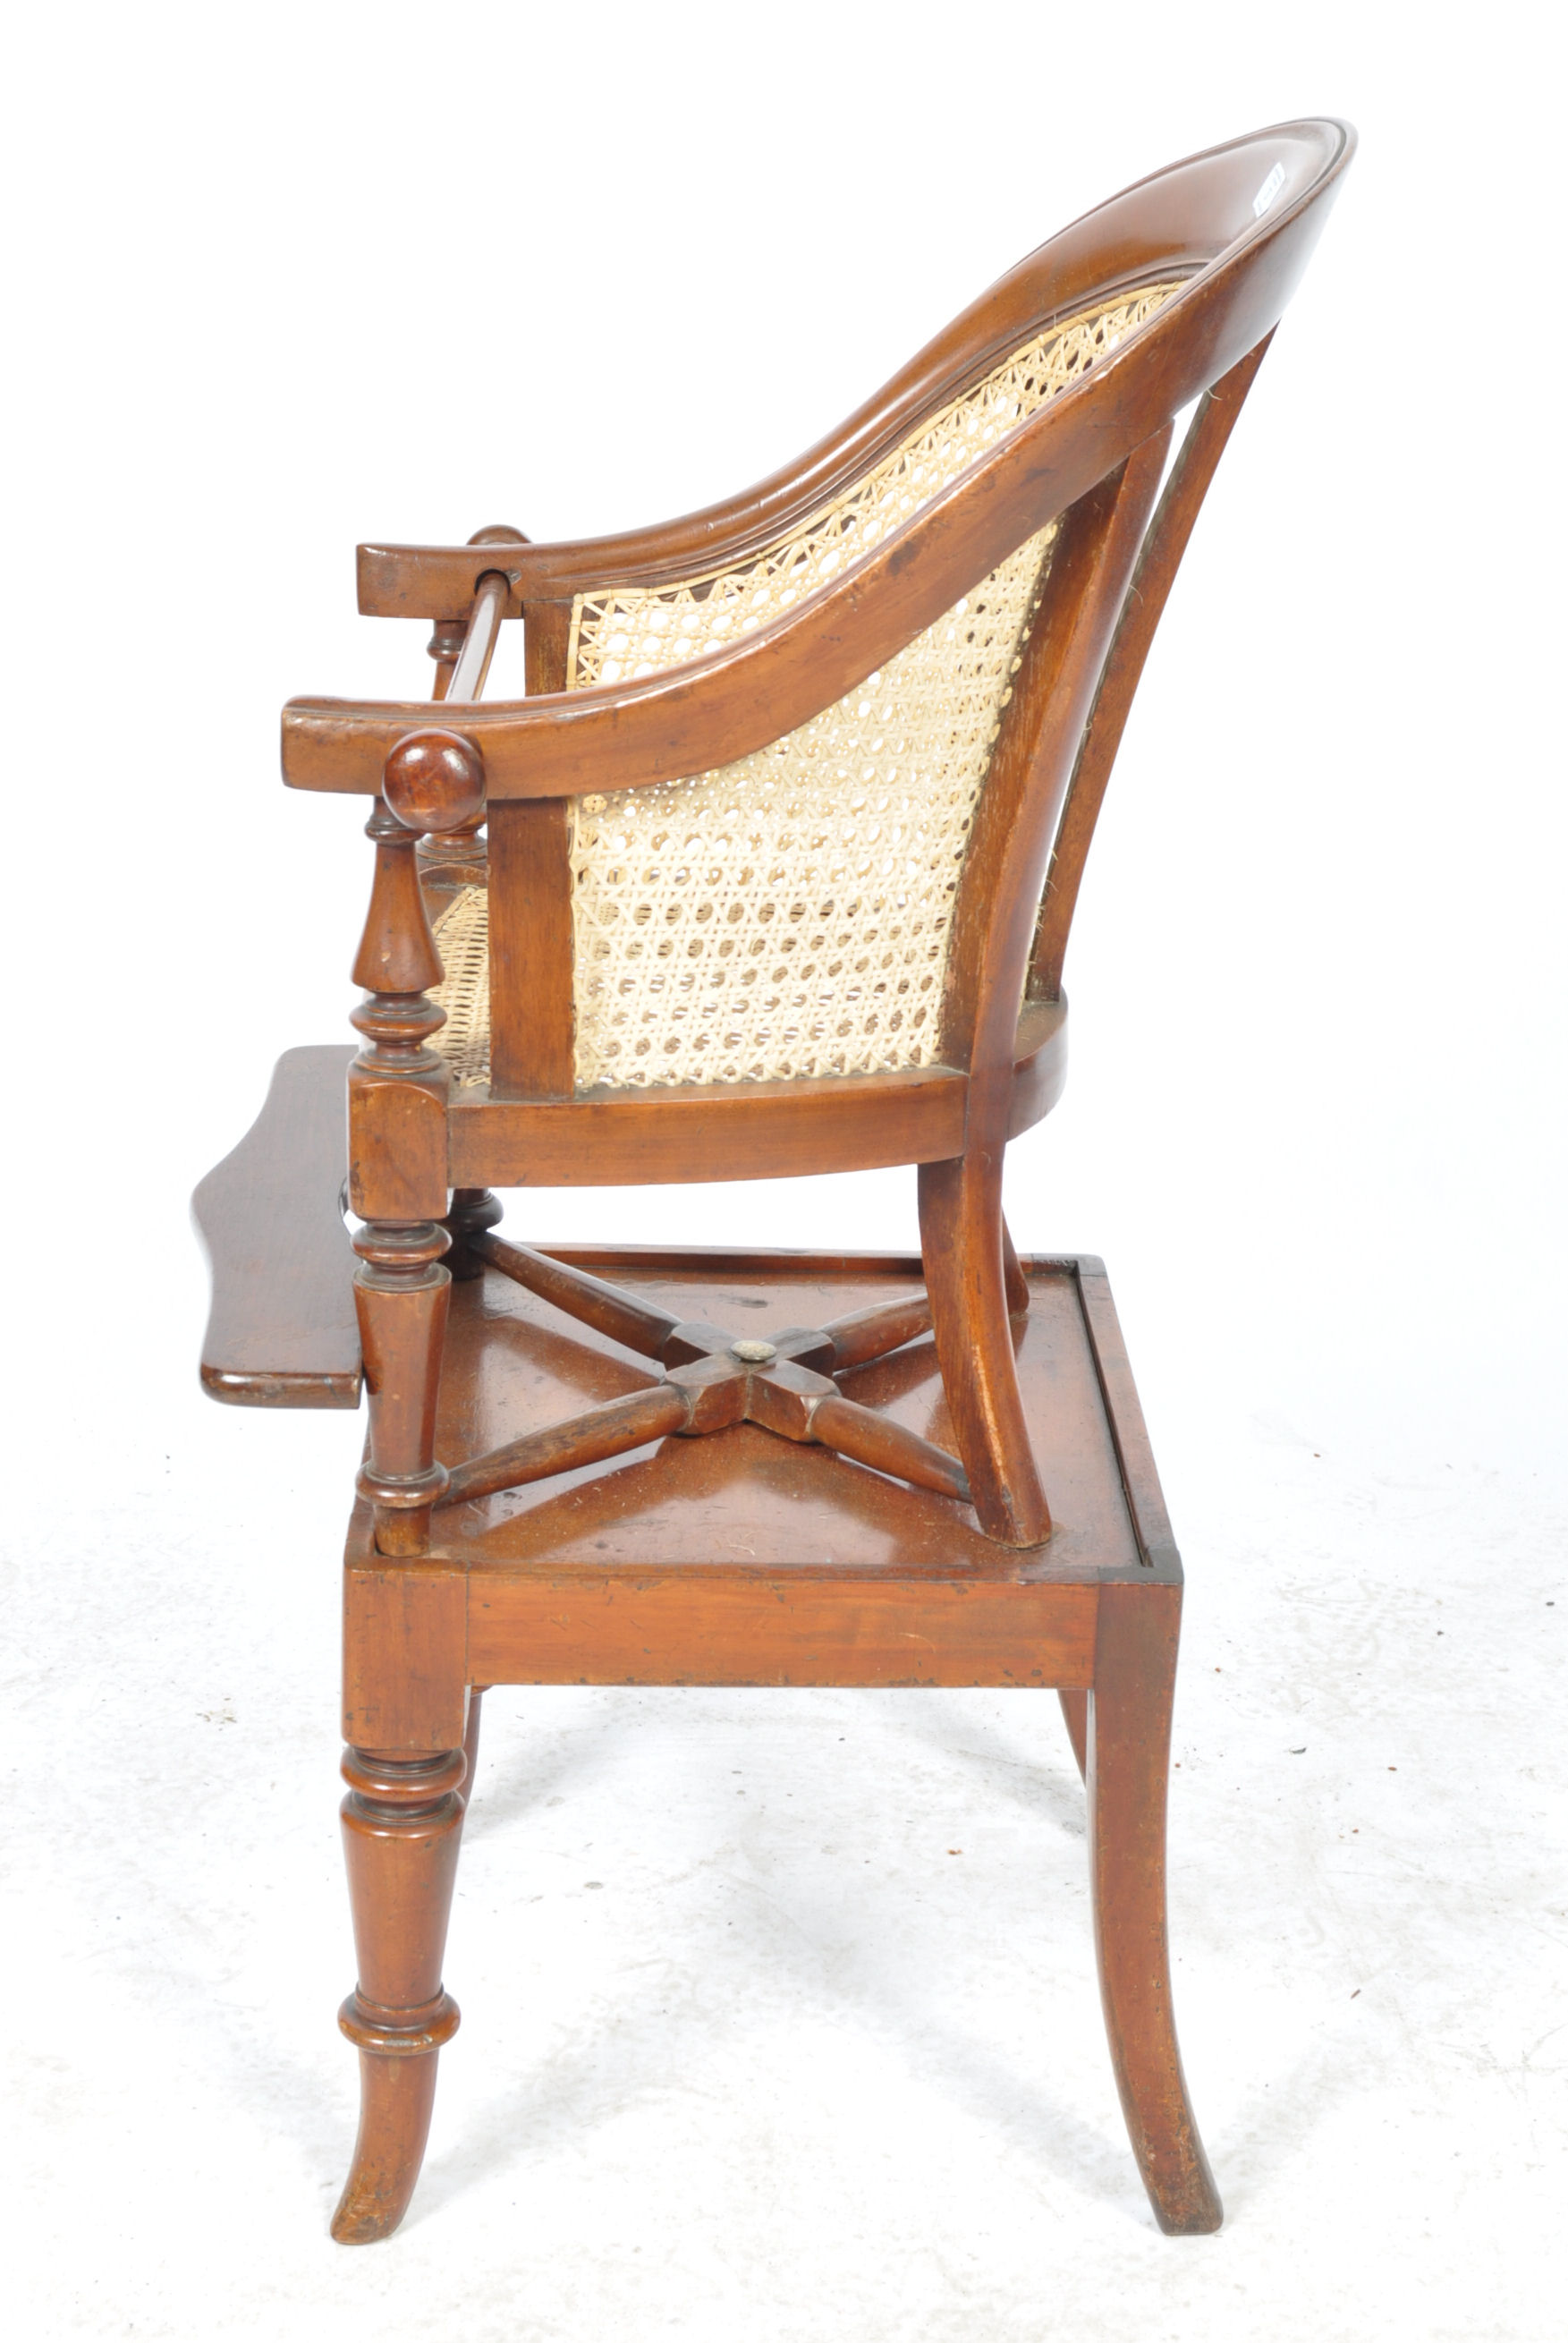 19TH CENTURY VICTORIAN ENGLISH ANTIQUE HIGH CHAIR - Image 4 of 16